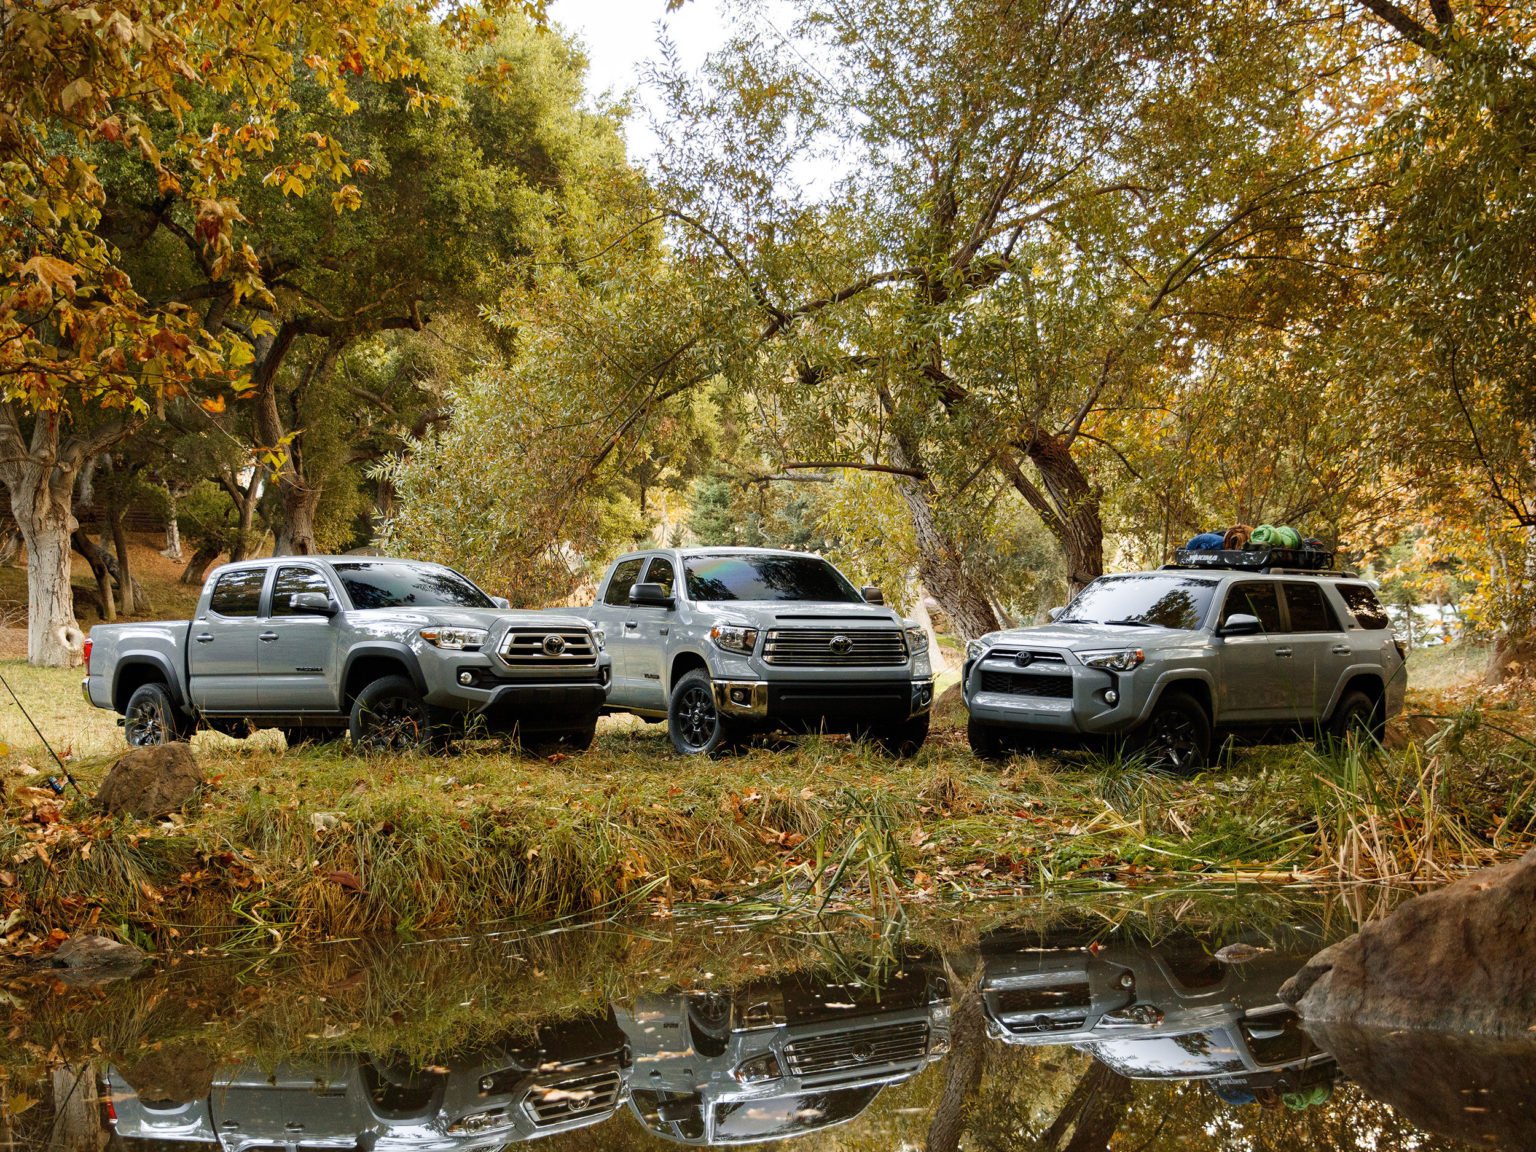 Toyota is making a limited number of new Trail edition models.